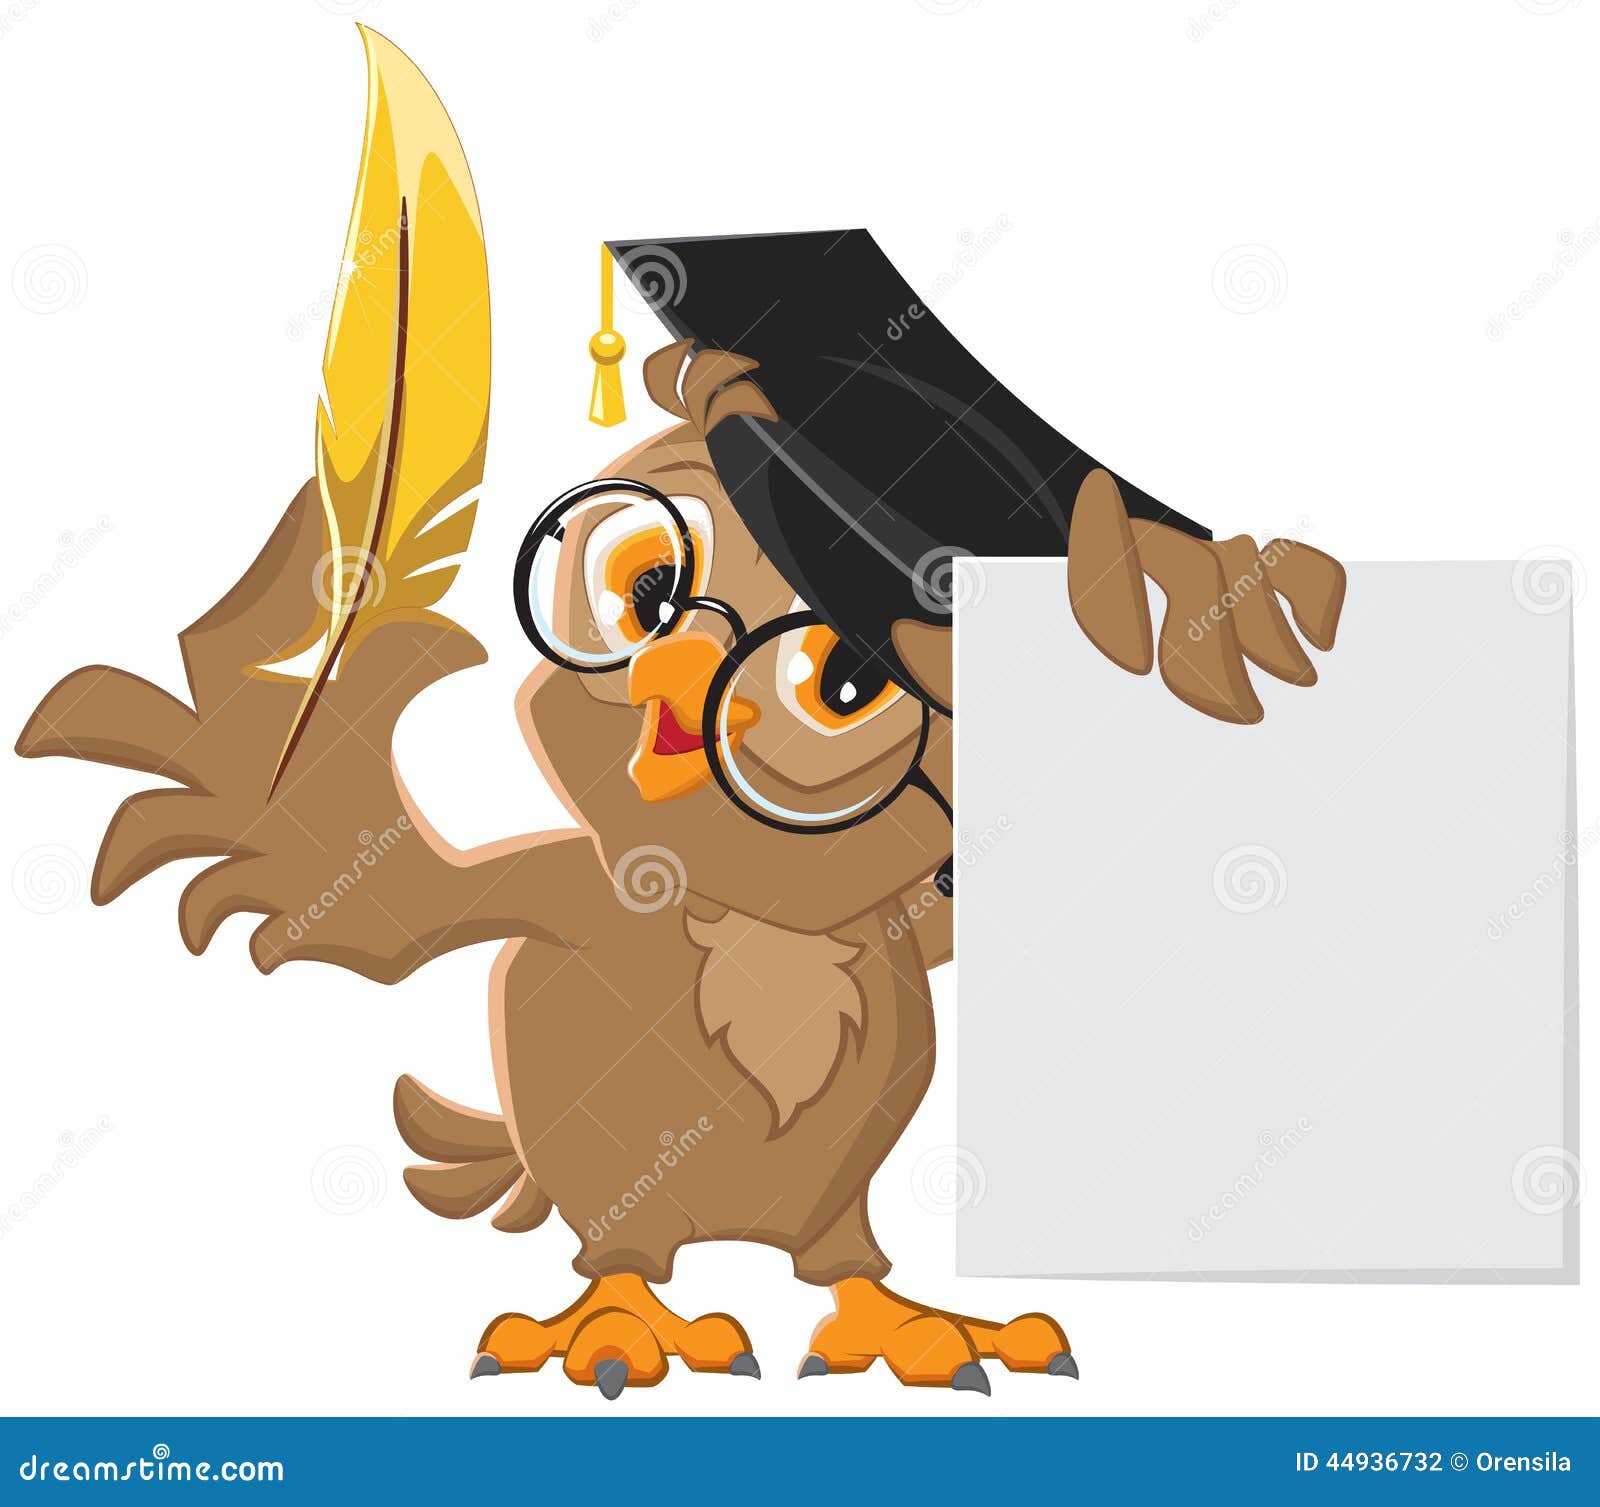 wise owl holding a golden pen and a sheet of paper